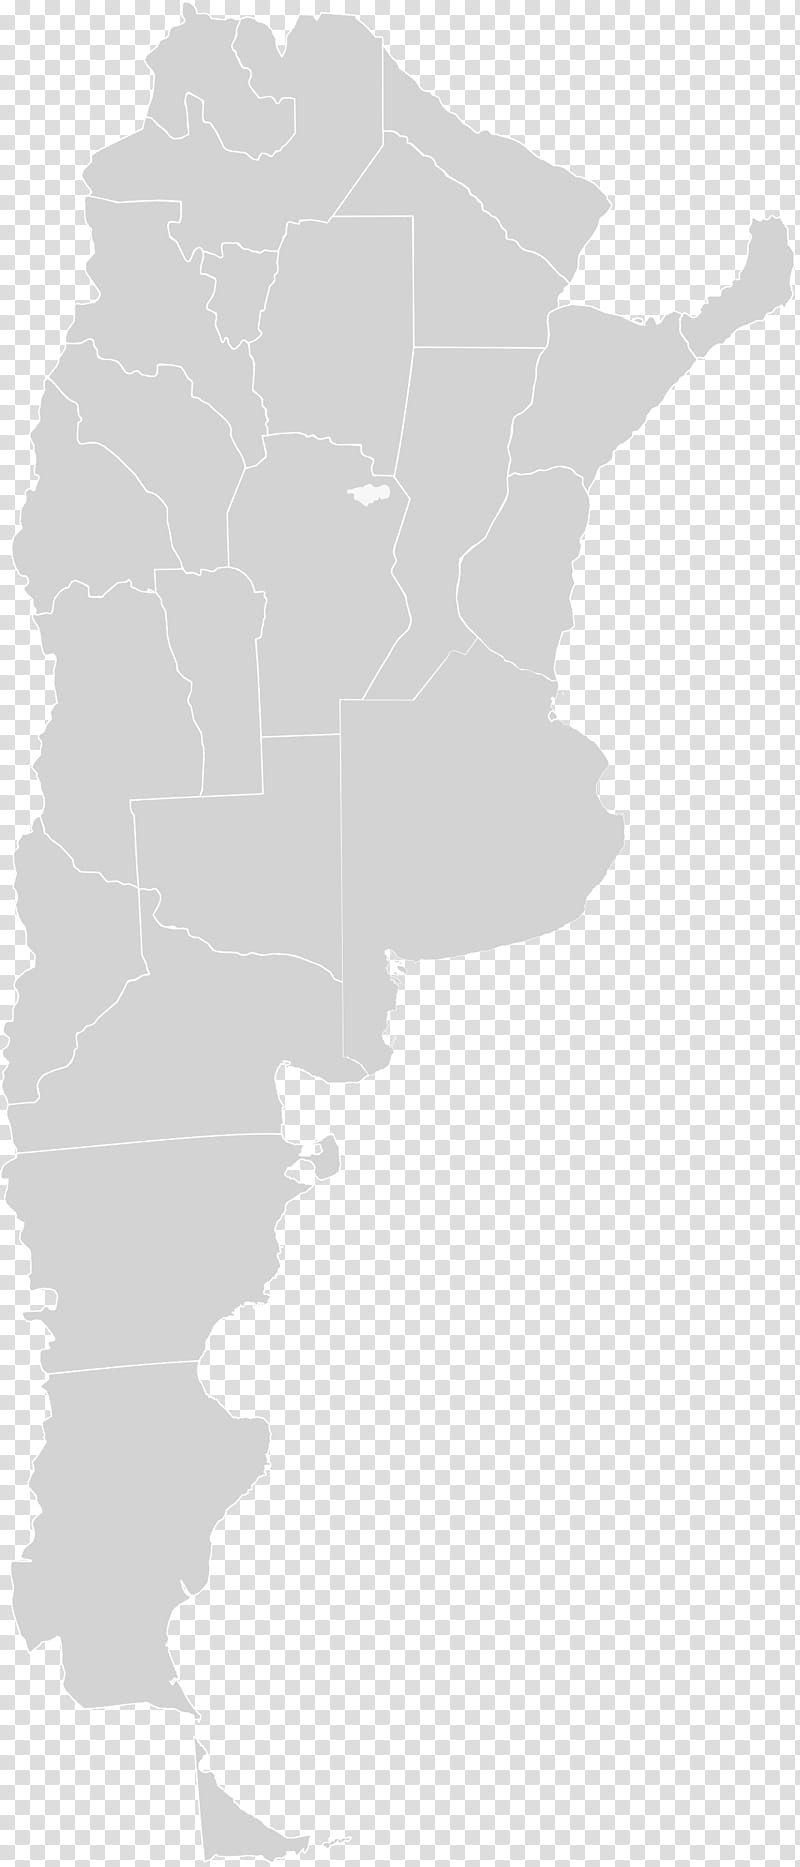 Map, Argentina, Blank Map, Black And White
, Silhouette, Sky transparent background PNG clipart